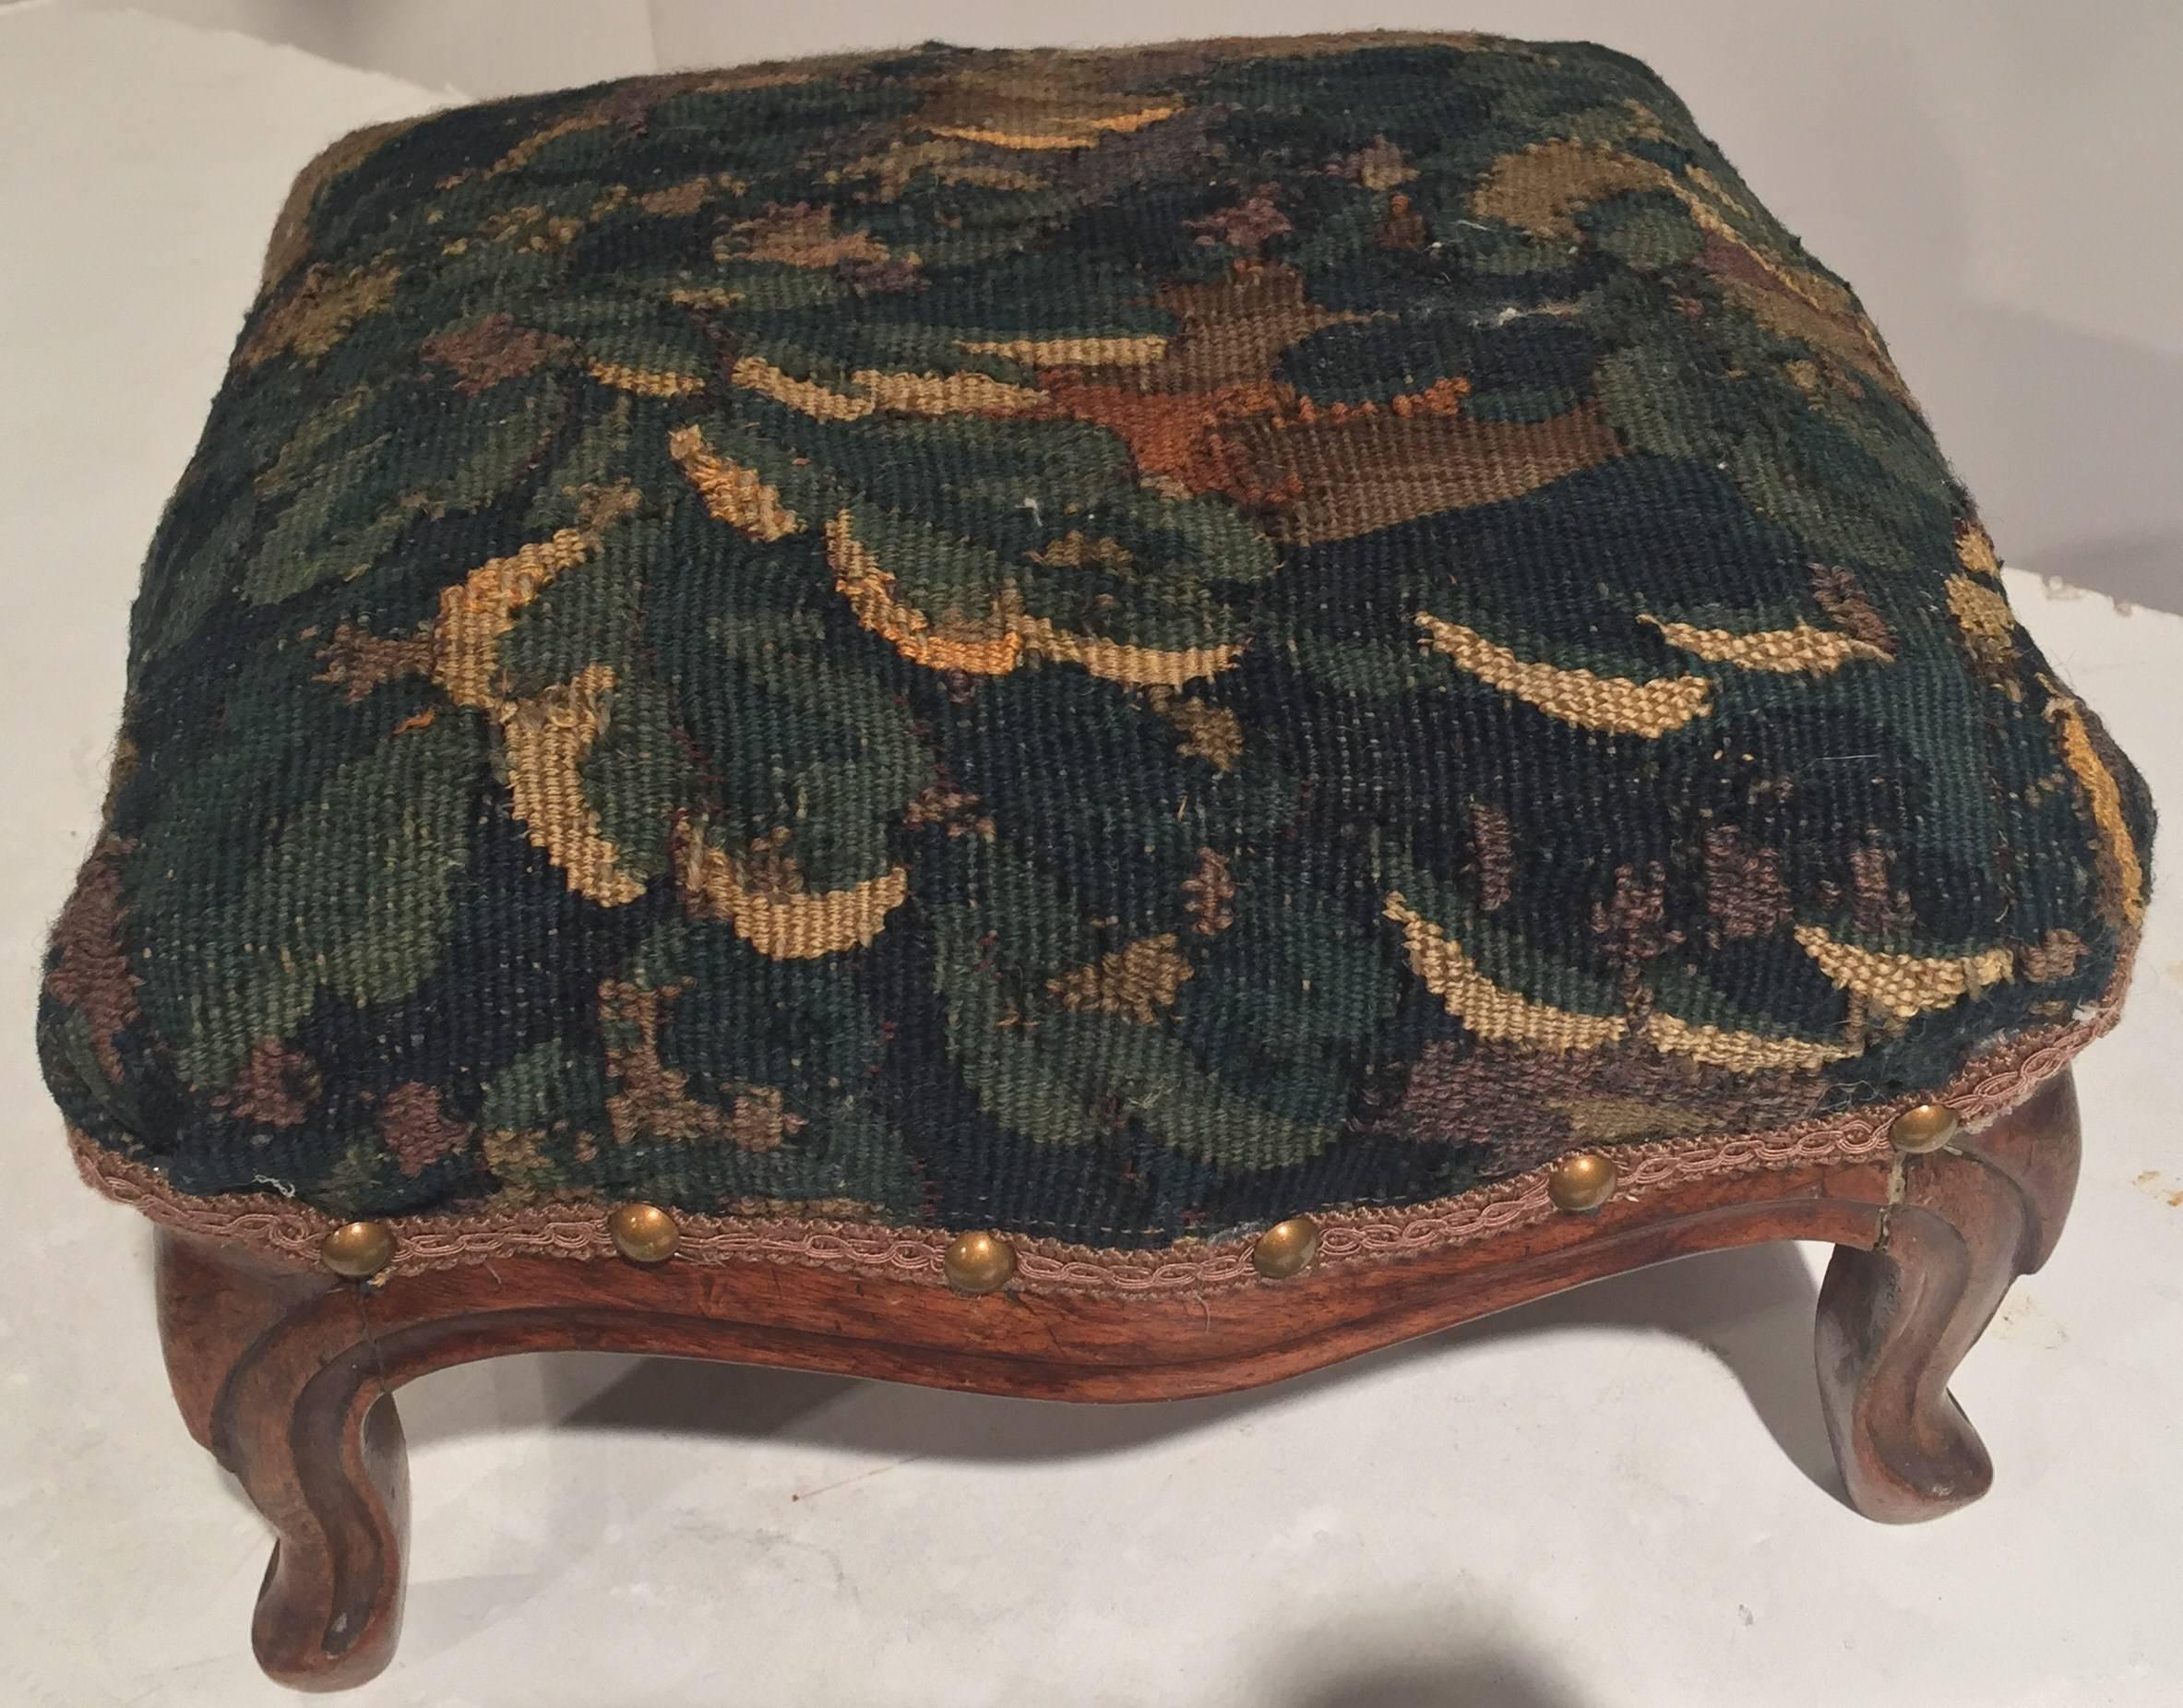 19th century Louis XV walnut foot stool upholstered with 18th century Aubusson tapestry fragment, circa: 1860.